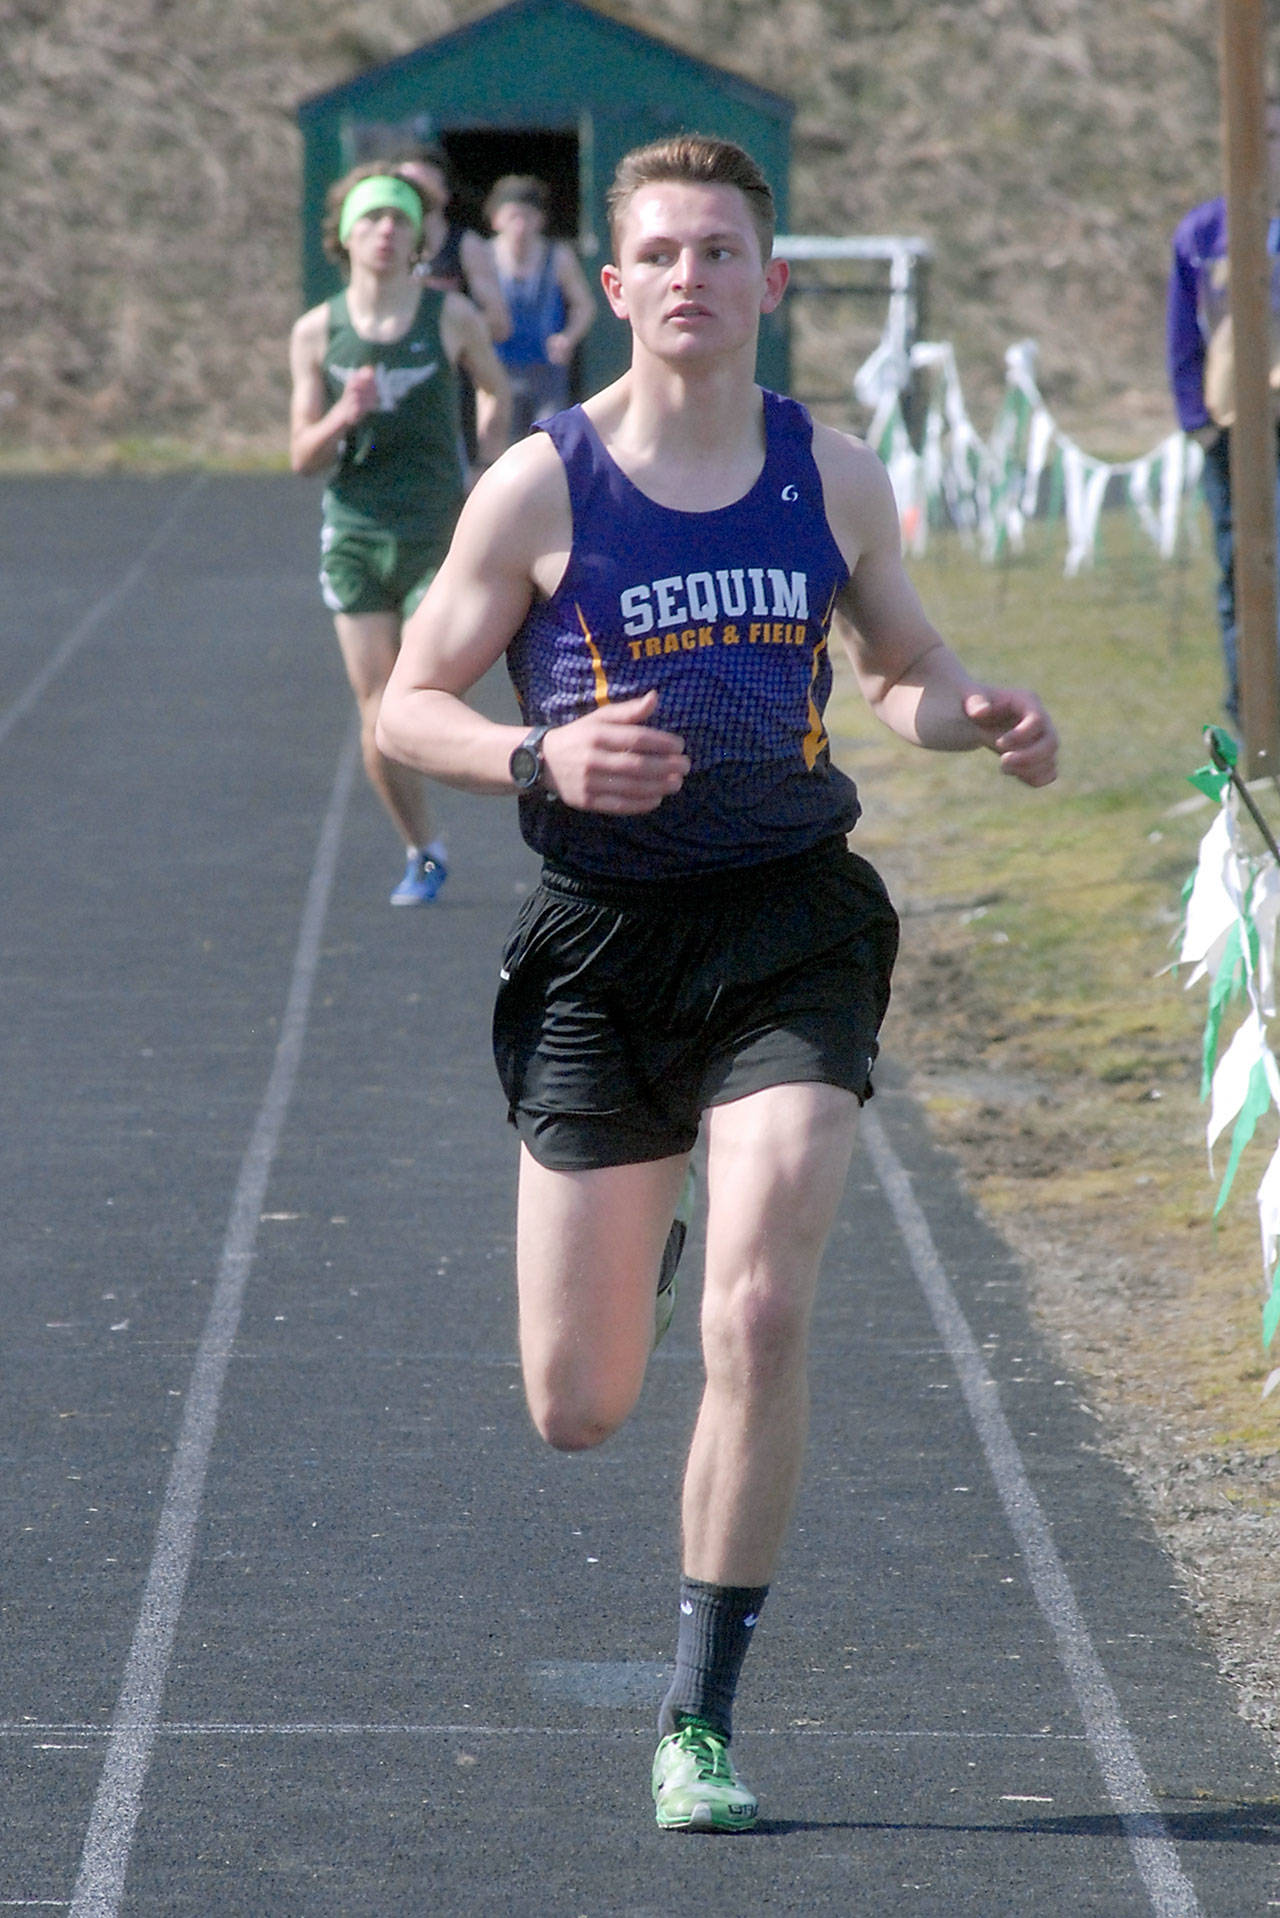 Keith Thorpe/Peninsula Daily News Sequim’s Murray Bingham crosses the finish line to take first in the boys 1,500-yard race as Port Angeles’ Thomas Shaw follows to take second at Saturday’s Port Angeles Invitational meet at Port Angeles High School.